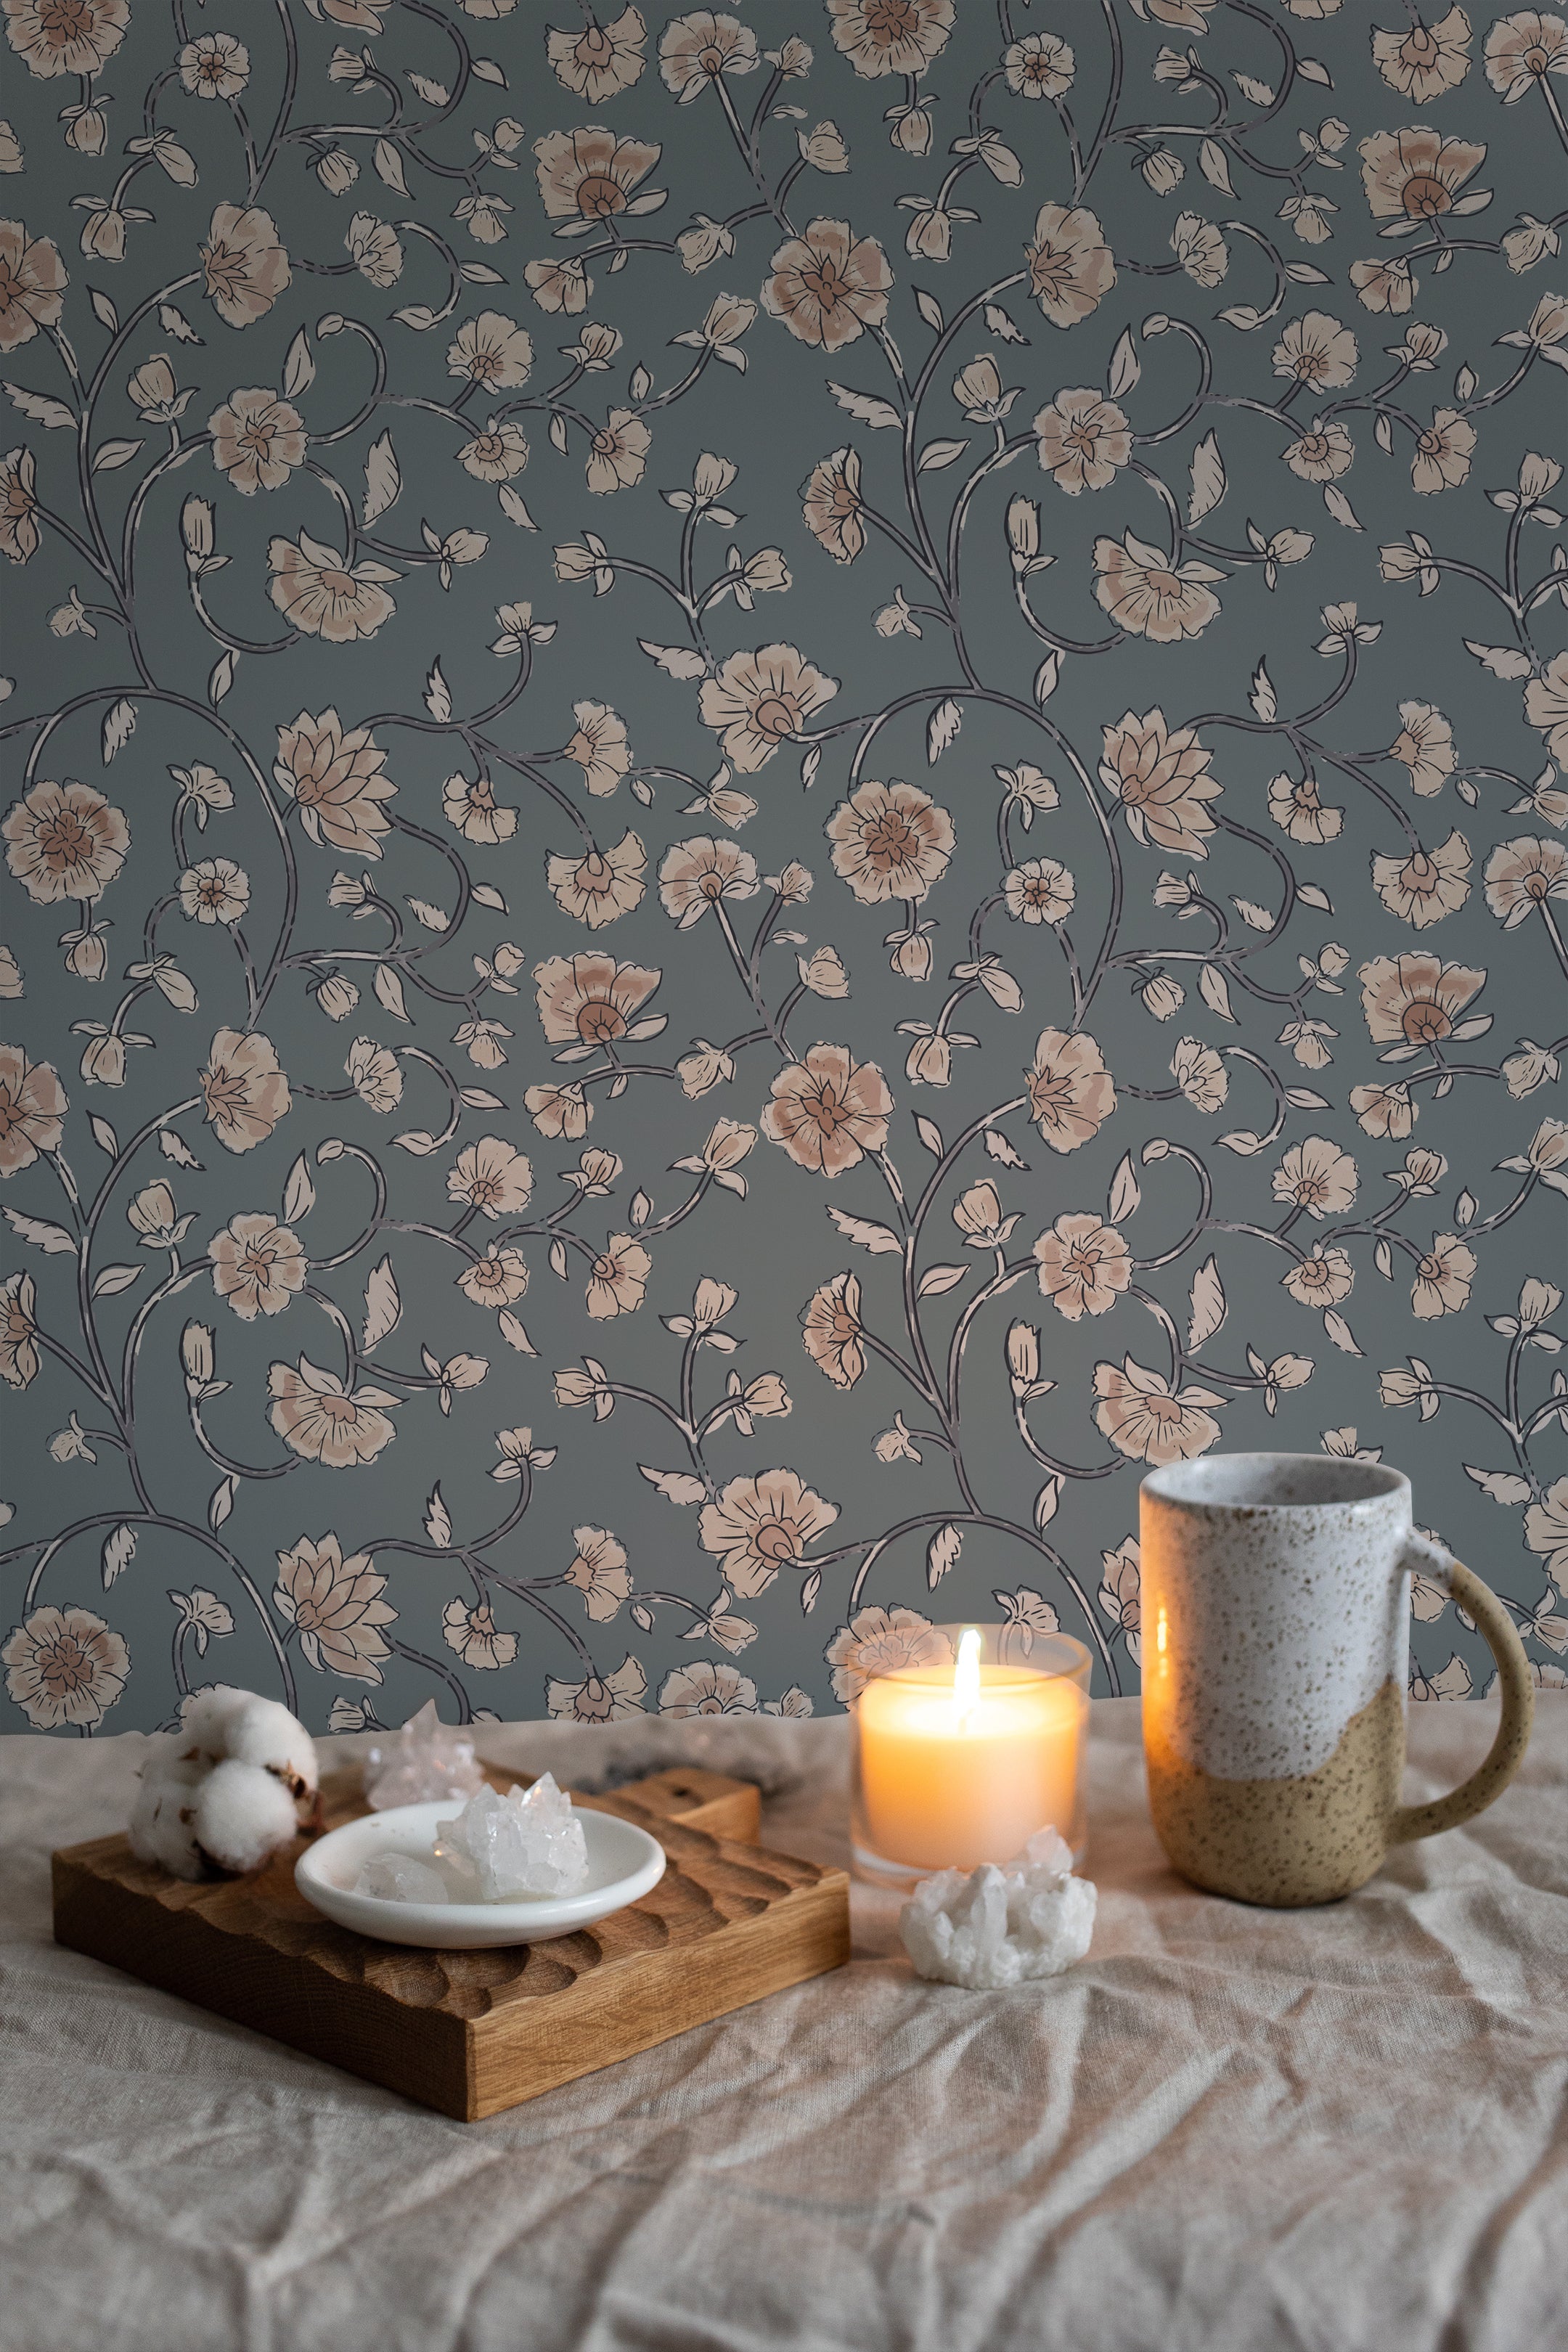 Cozy and intimate corner featuring Eternal Spring Wallpaper with a pattern of beige floral blooms linked by dark blue vines on a muted teal background. A candle lit on a wooden tray beside a ceramic mug and white crystals on a plate adds a warm, inviting ambiance.